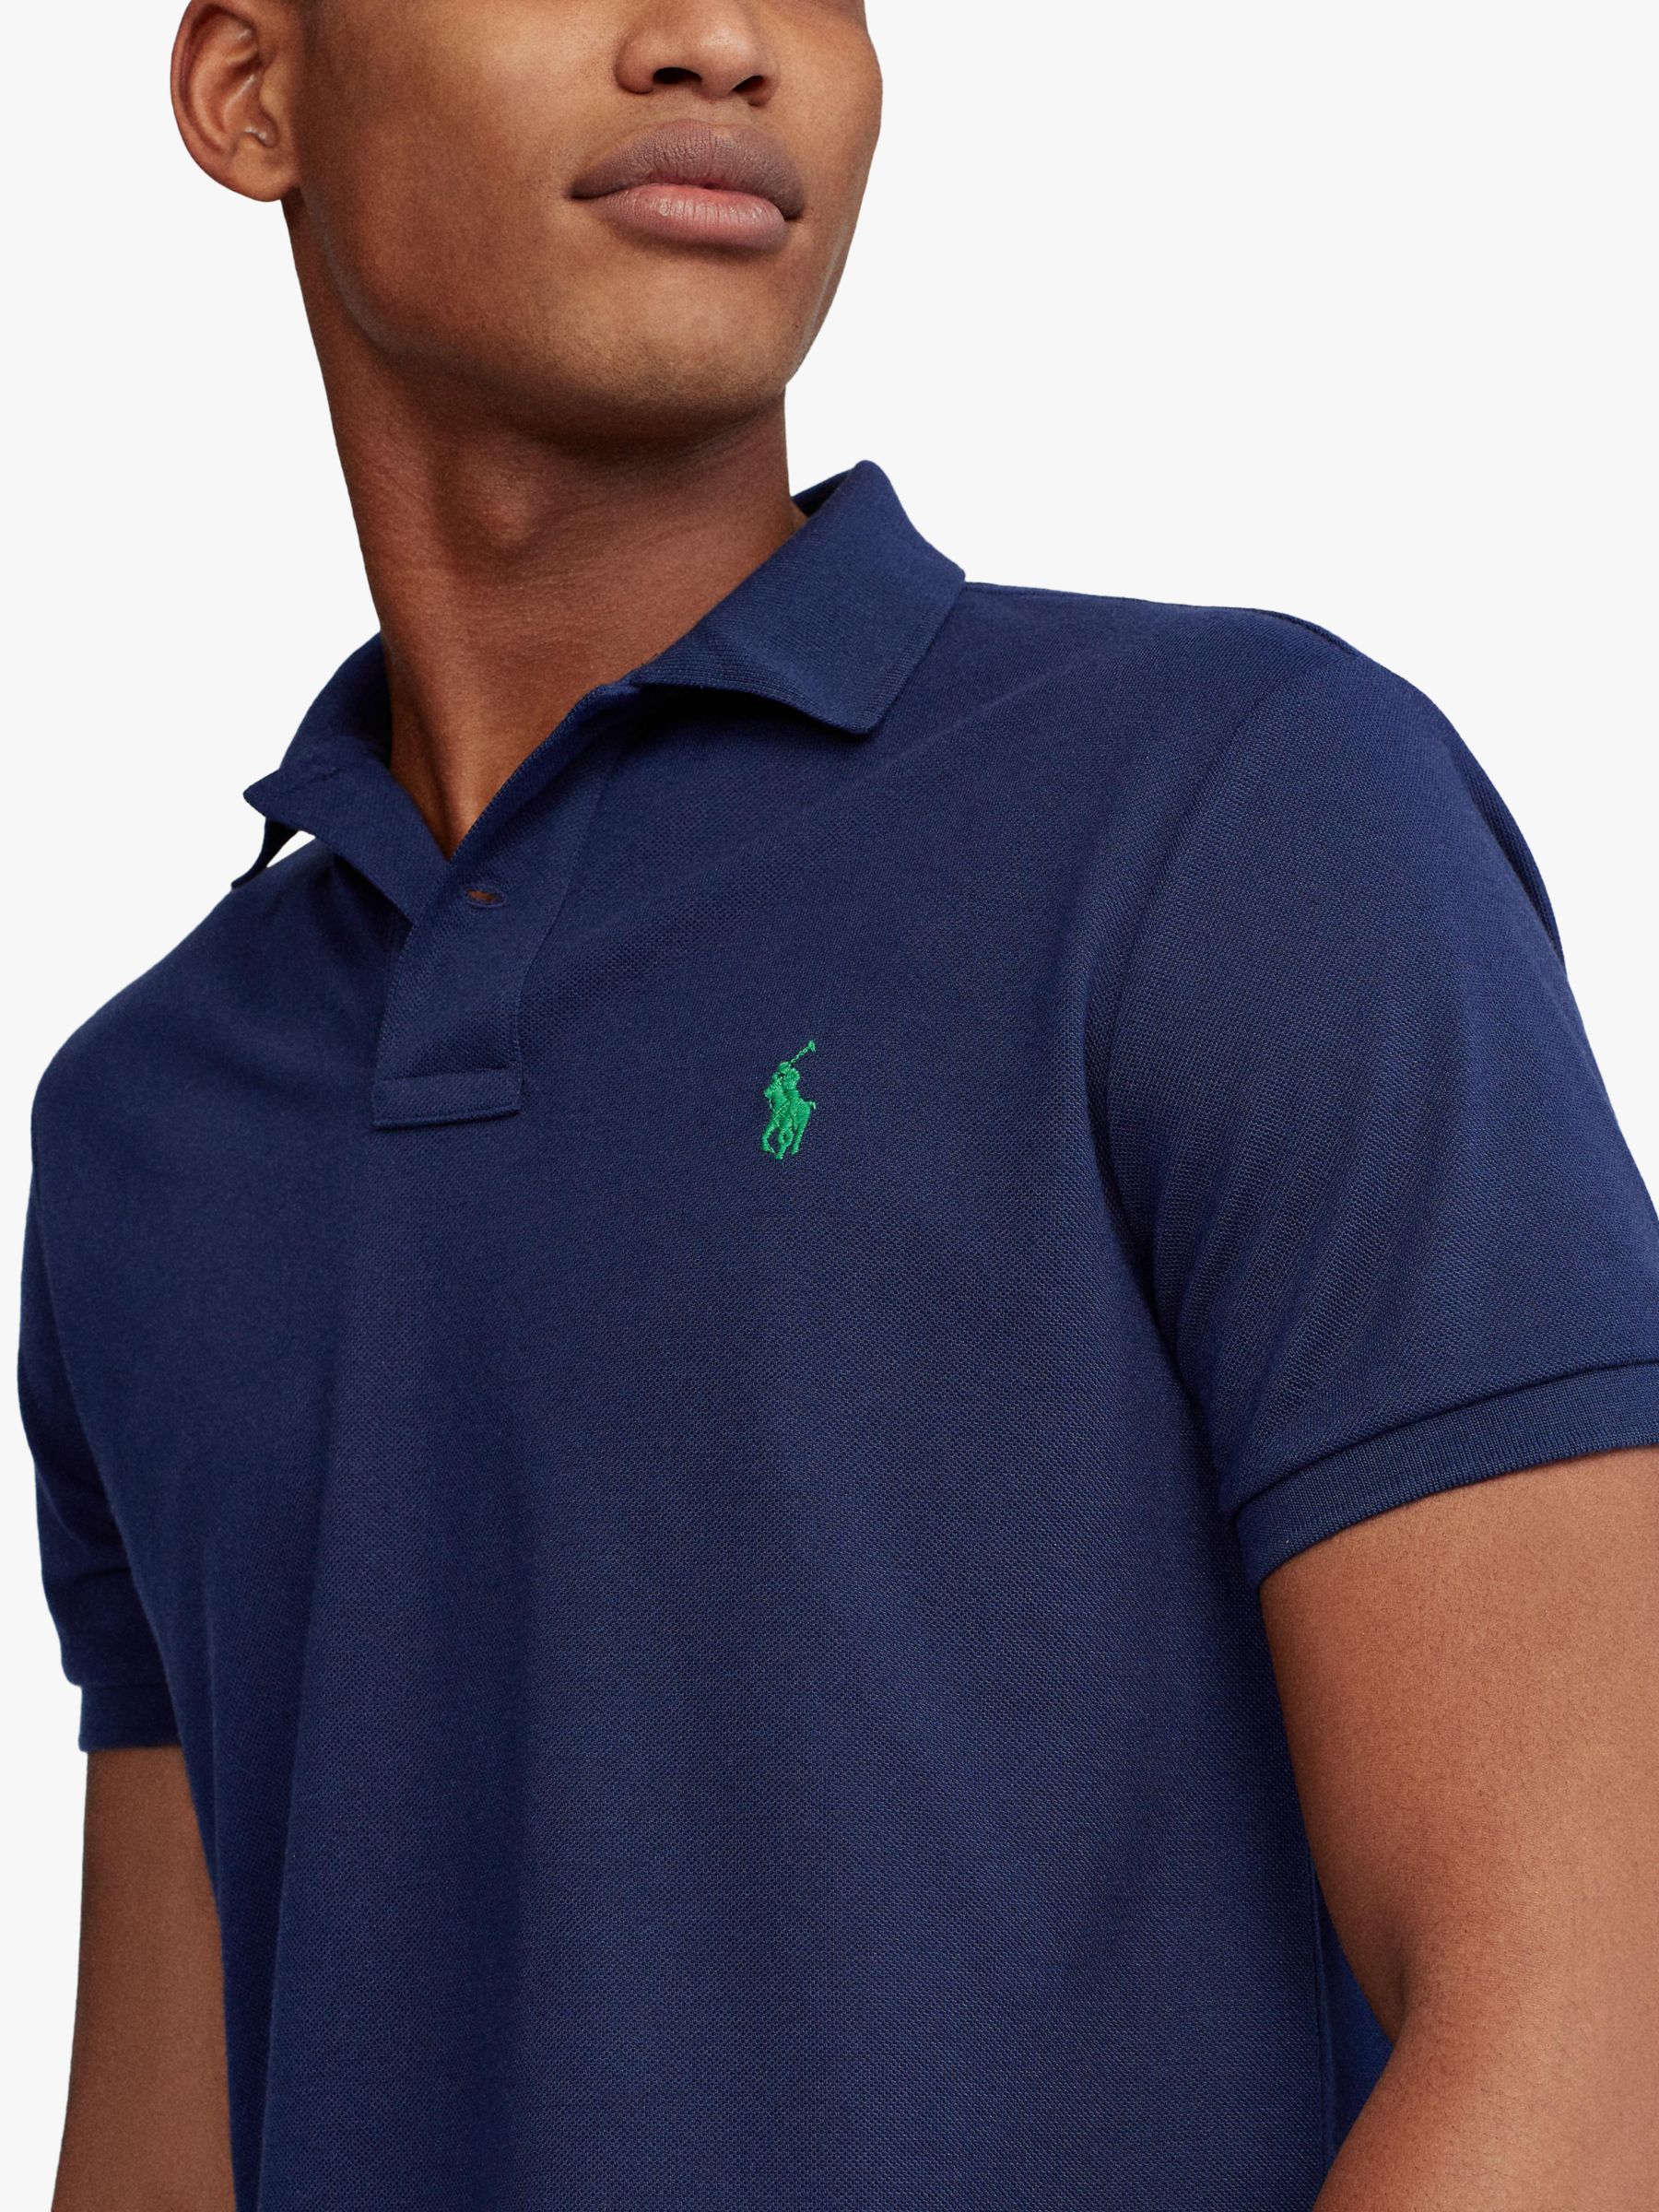 Polo Ralph Lauren The Earth Short Sleeve Recycled Mesh Polo Shirt, French Navy at John Lewis